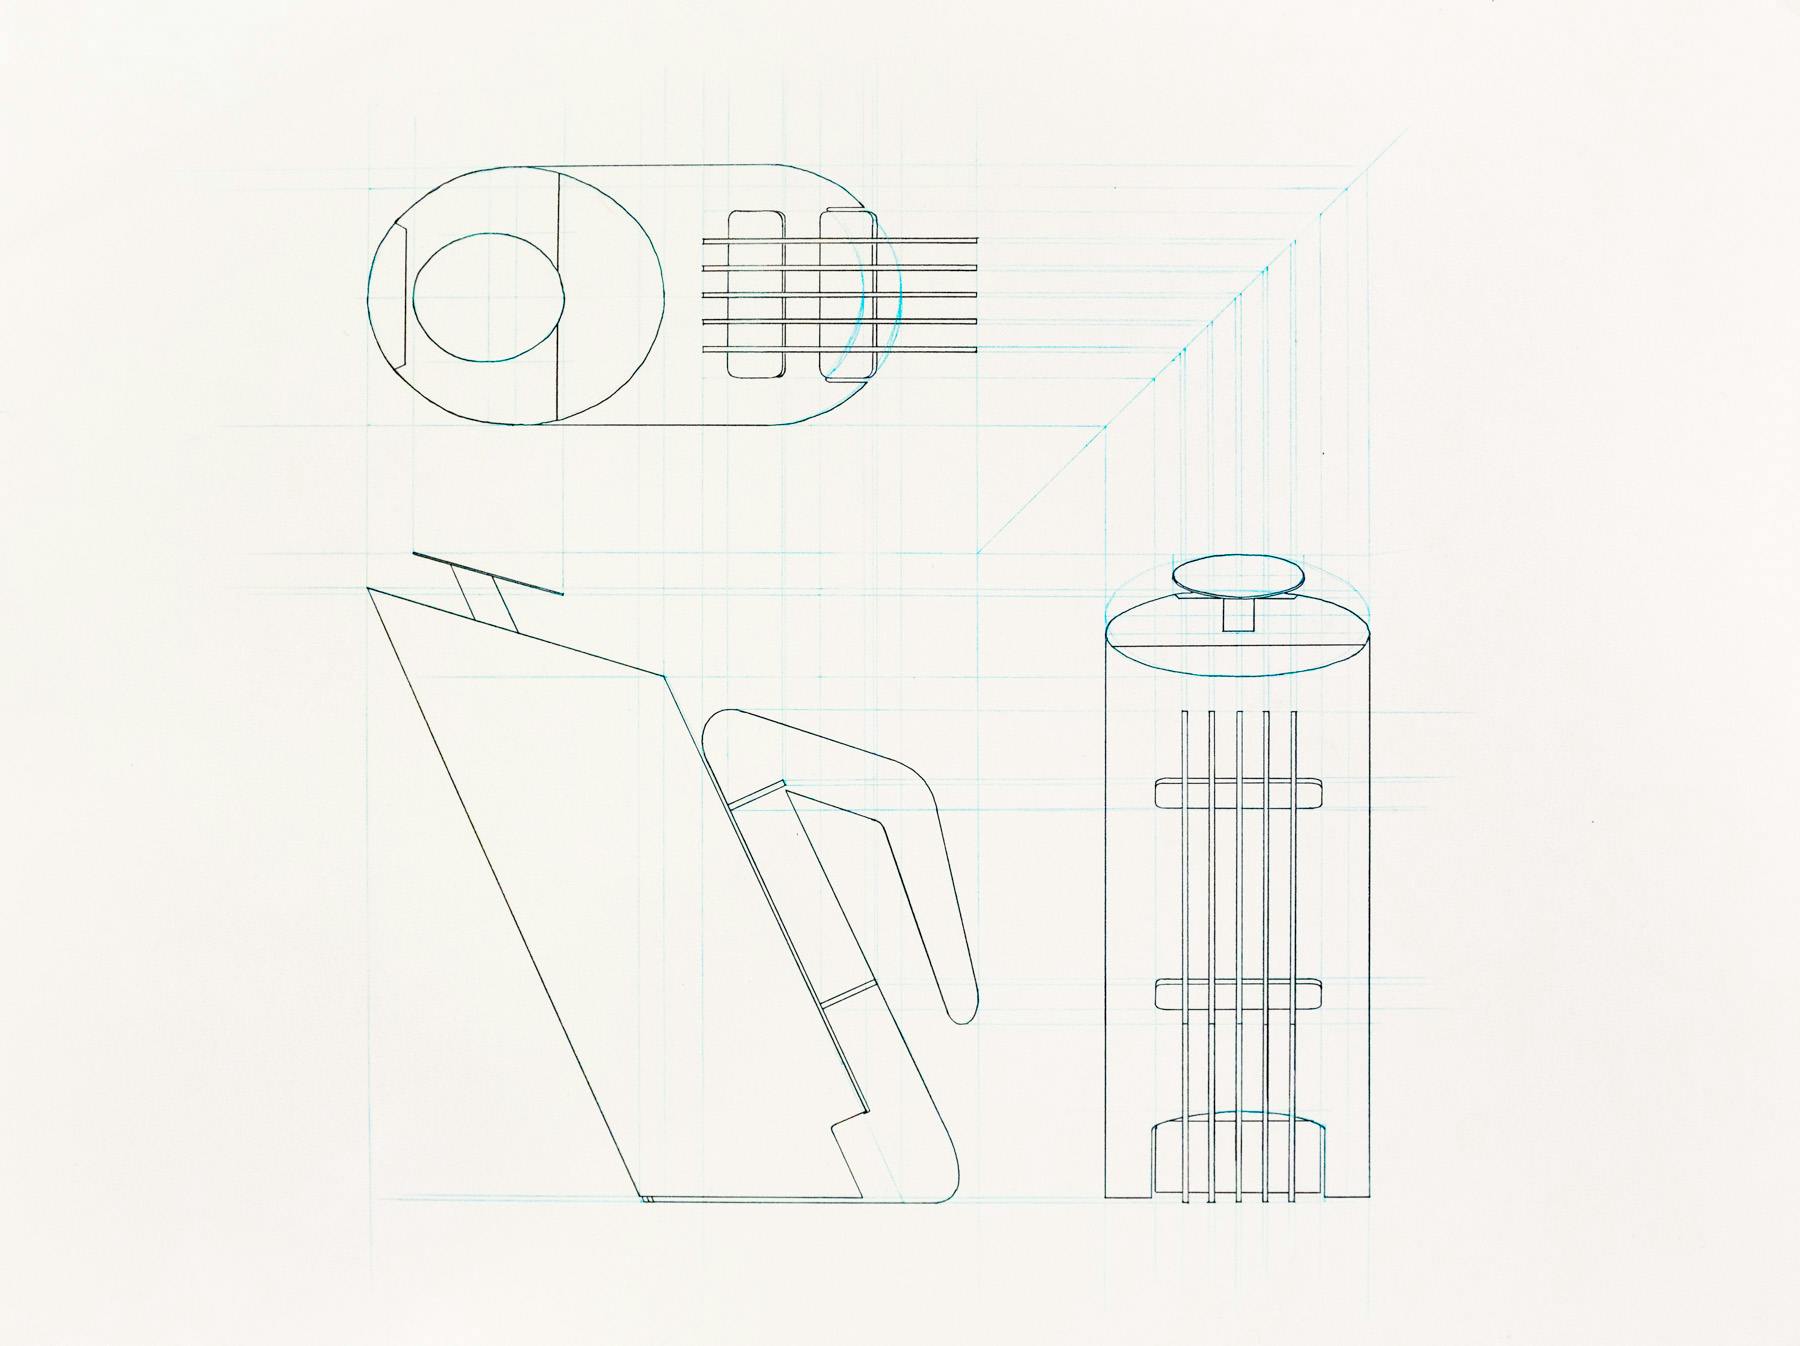 Orthographic drawing of the chosen french press design. The press is slanted at a 115-degree angle, giving it a sense of movement without compromising balance.